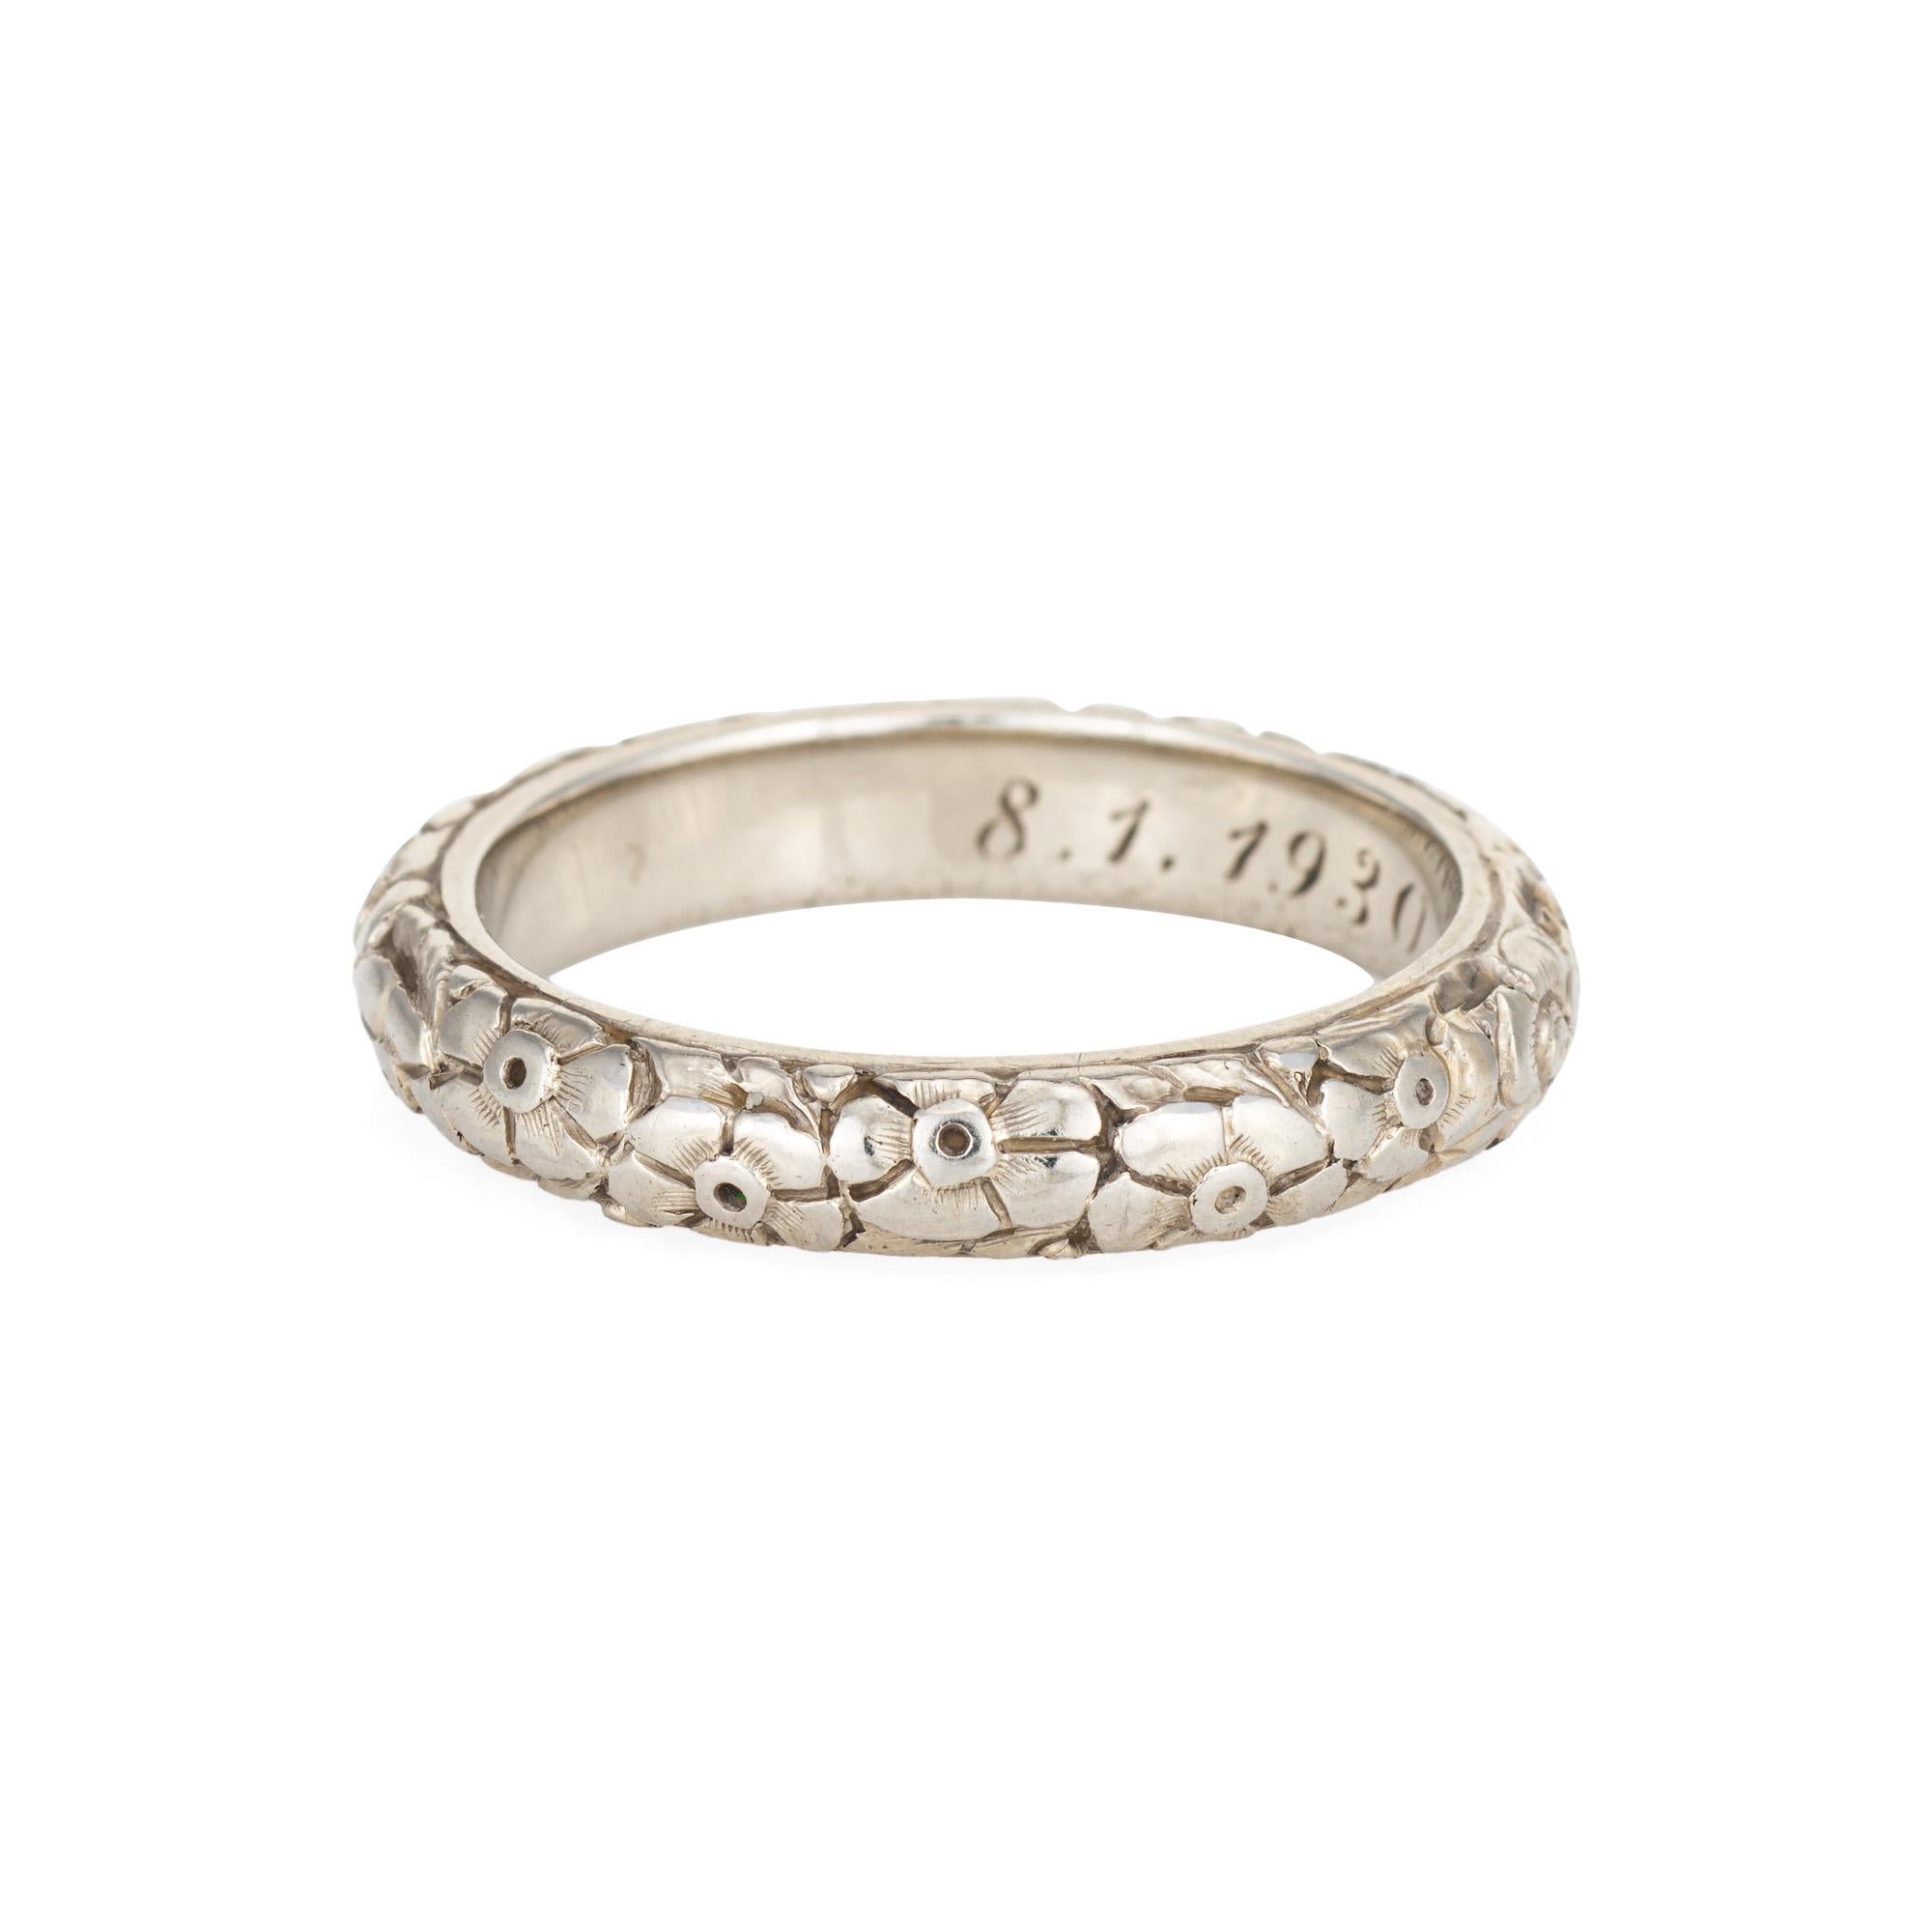 Elegant vintage Art Deco era band (circa 1930) crafted in 14k white gold. 

The ring epitomizes vintage charm and would make a lovely wedding band. Also great worn alone or stacked with your jewelry from any era. The inner band is engraved